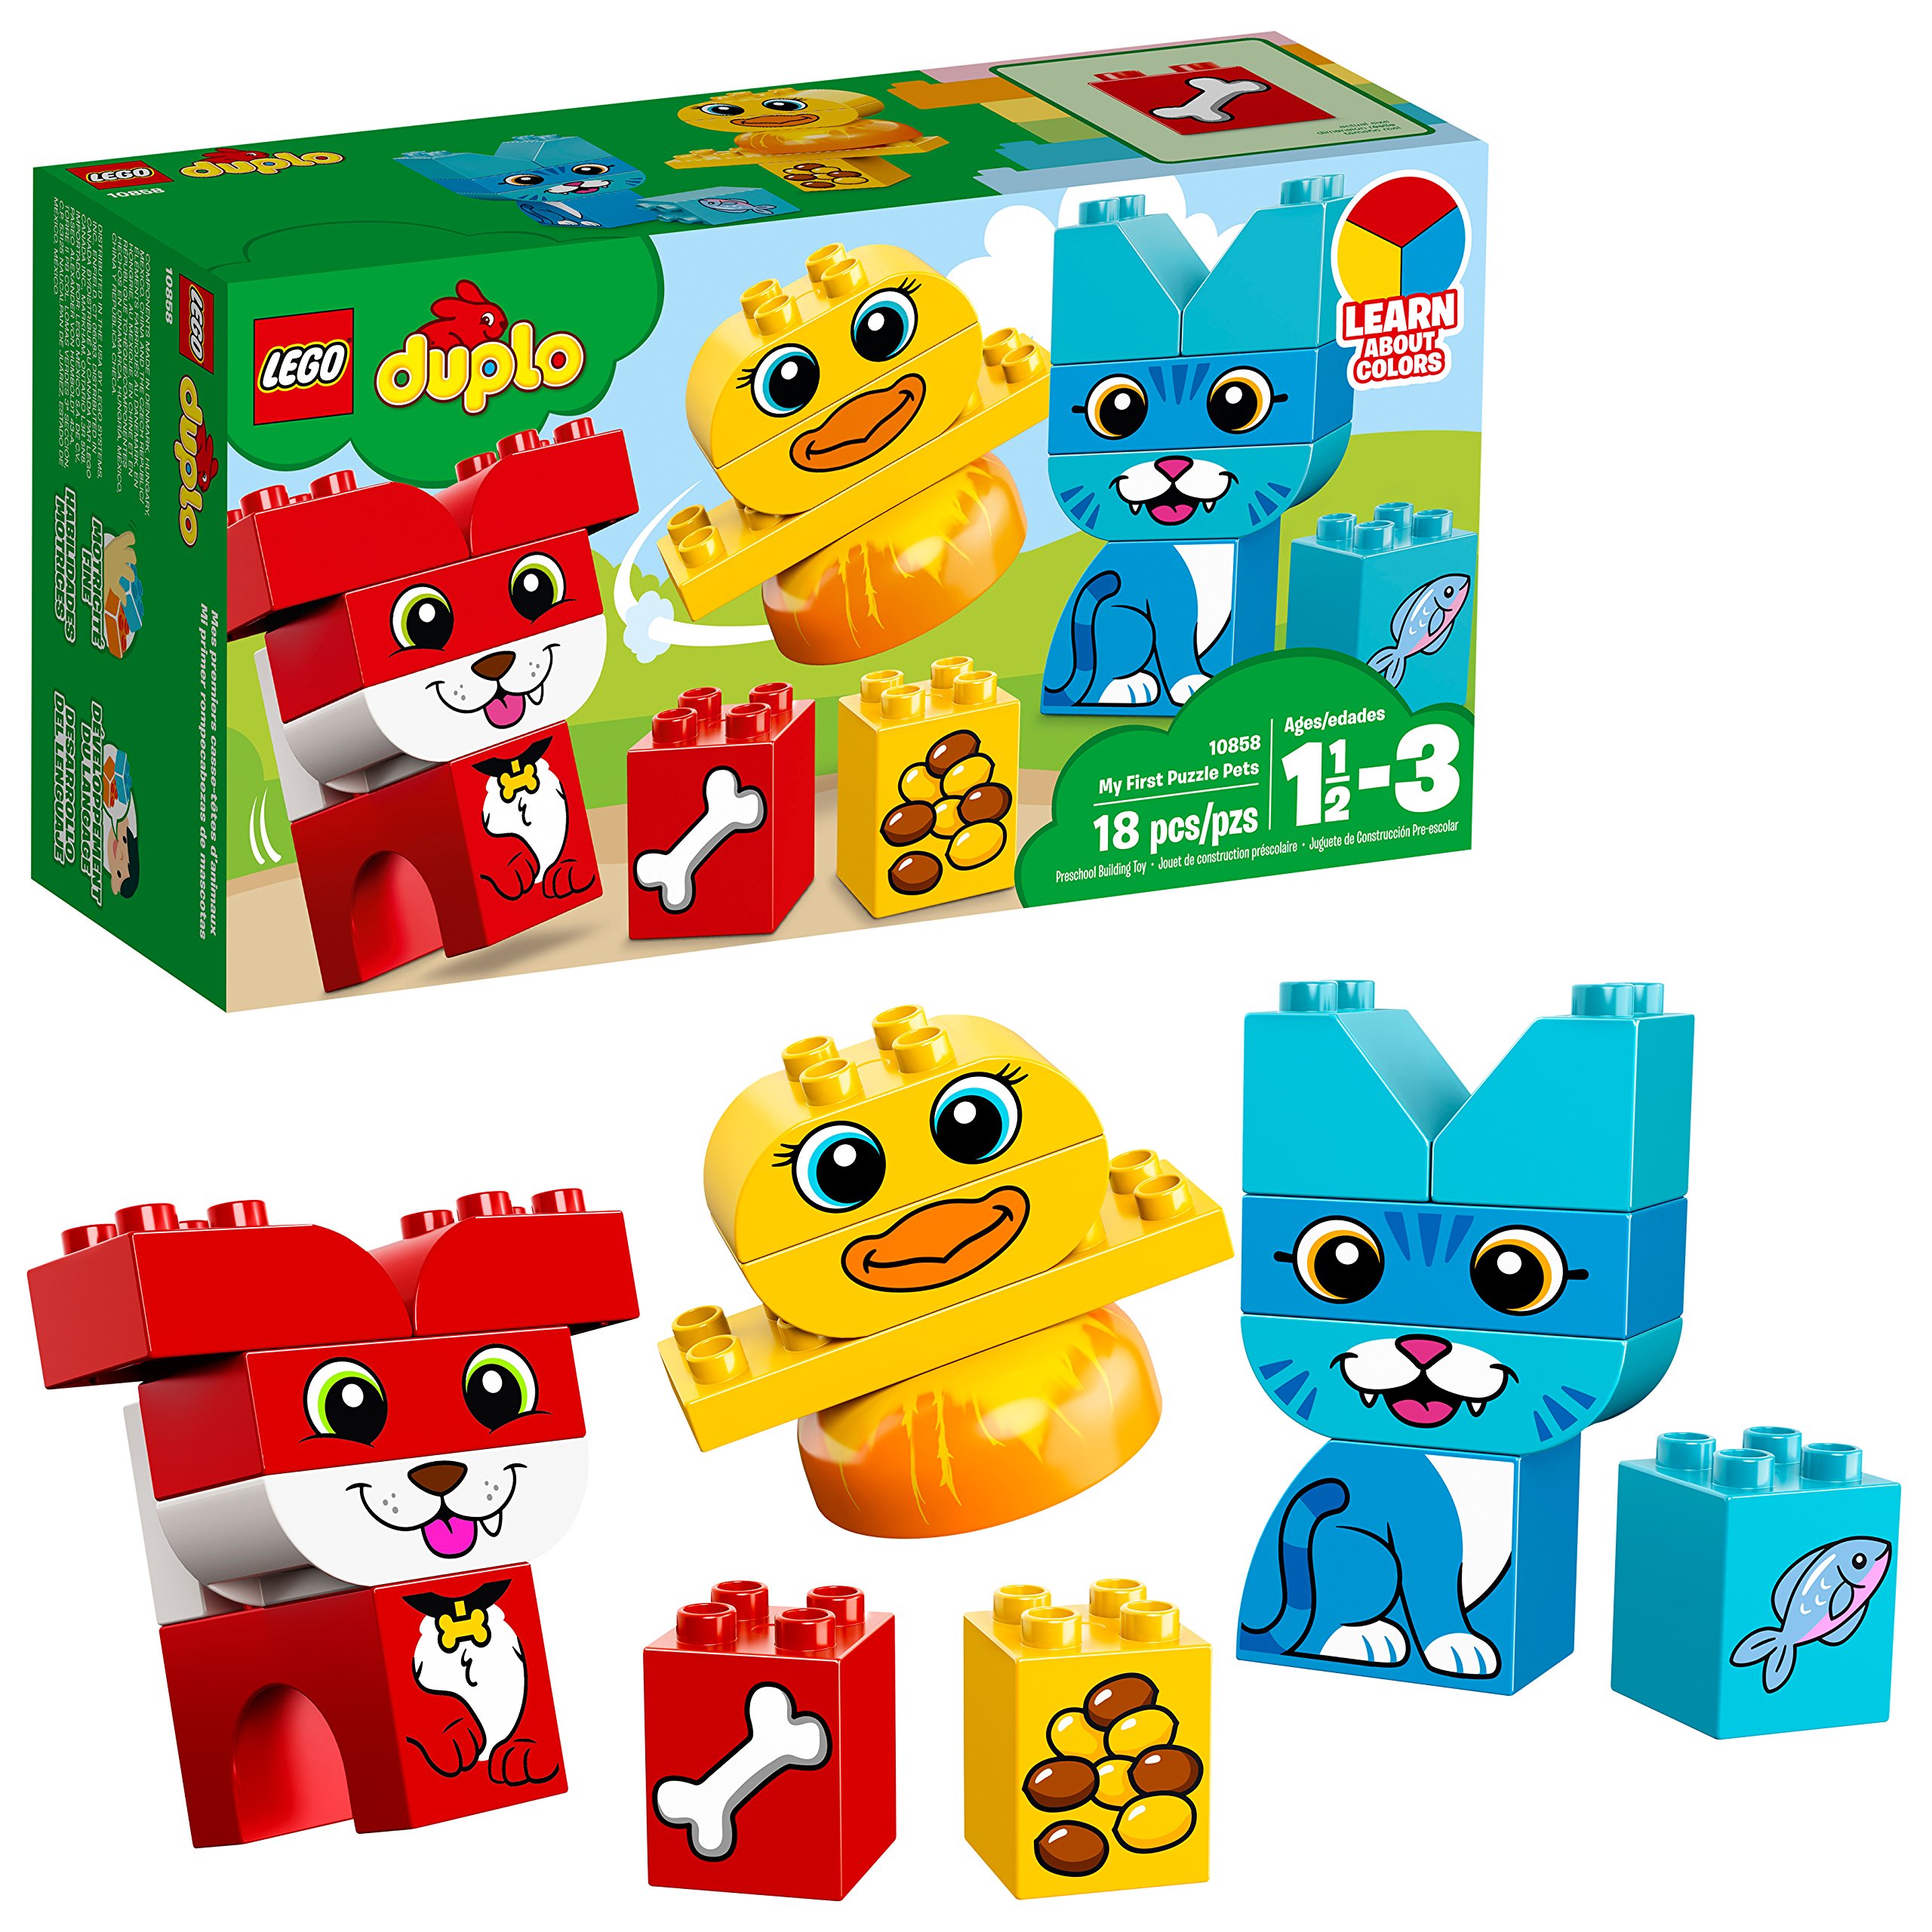 LEGO DUPLO My First Puzzle Pets 10858 Building Blocks (18 Pieces) (Discontinued by Manufacturer)